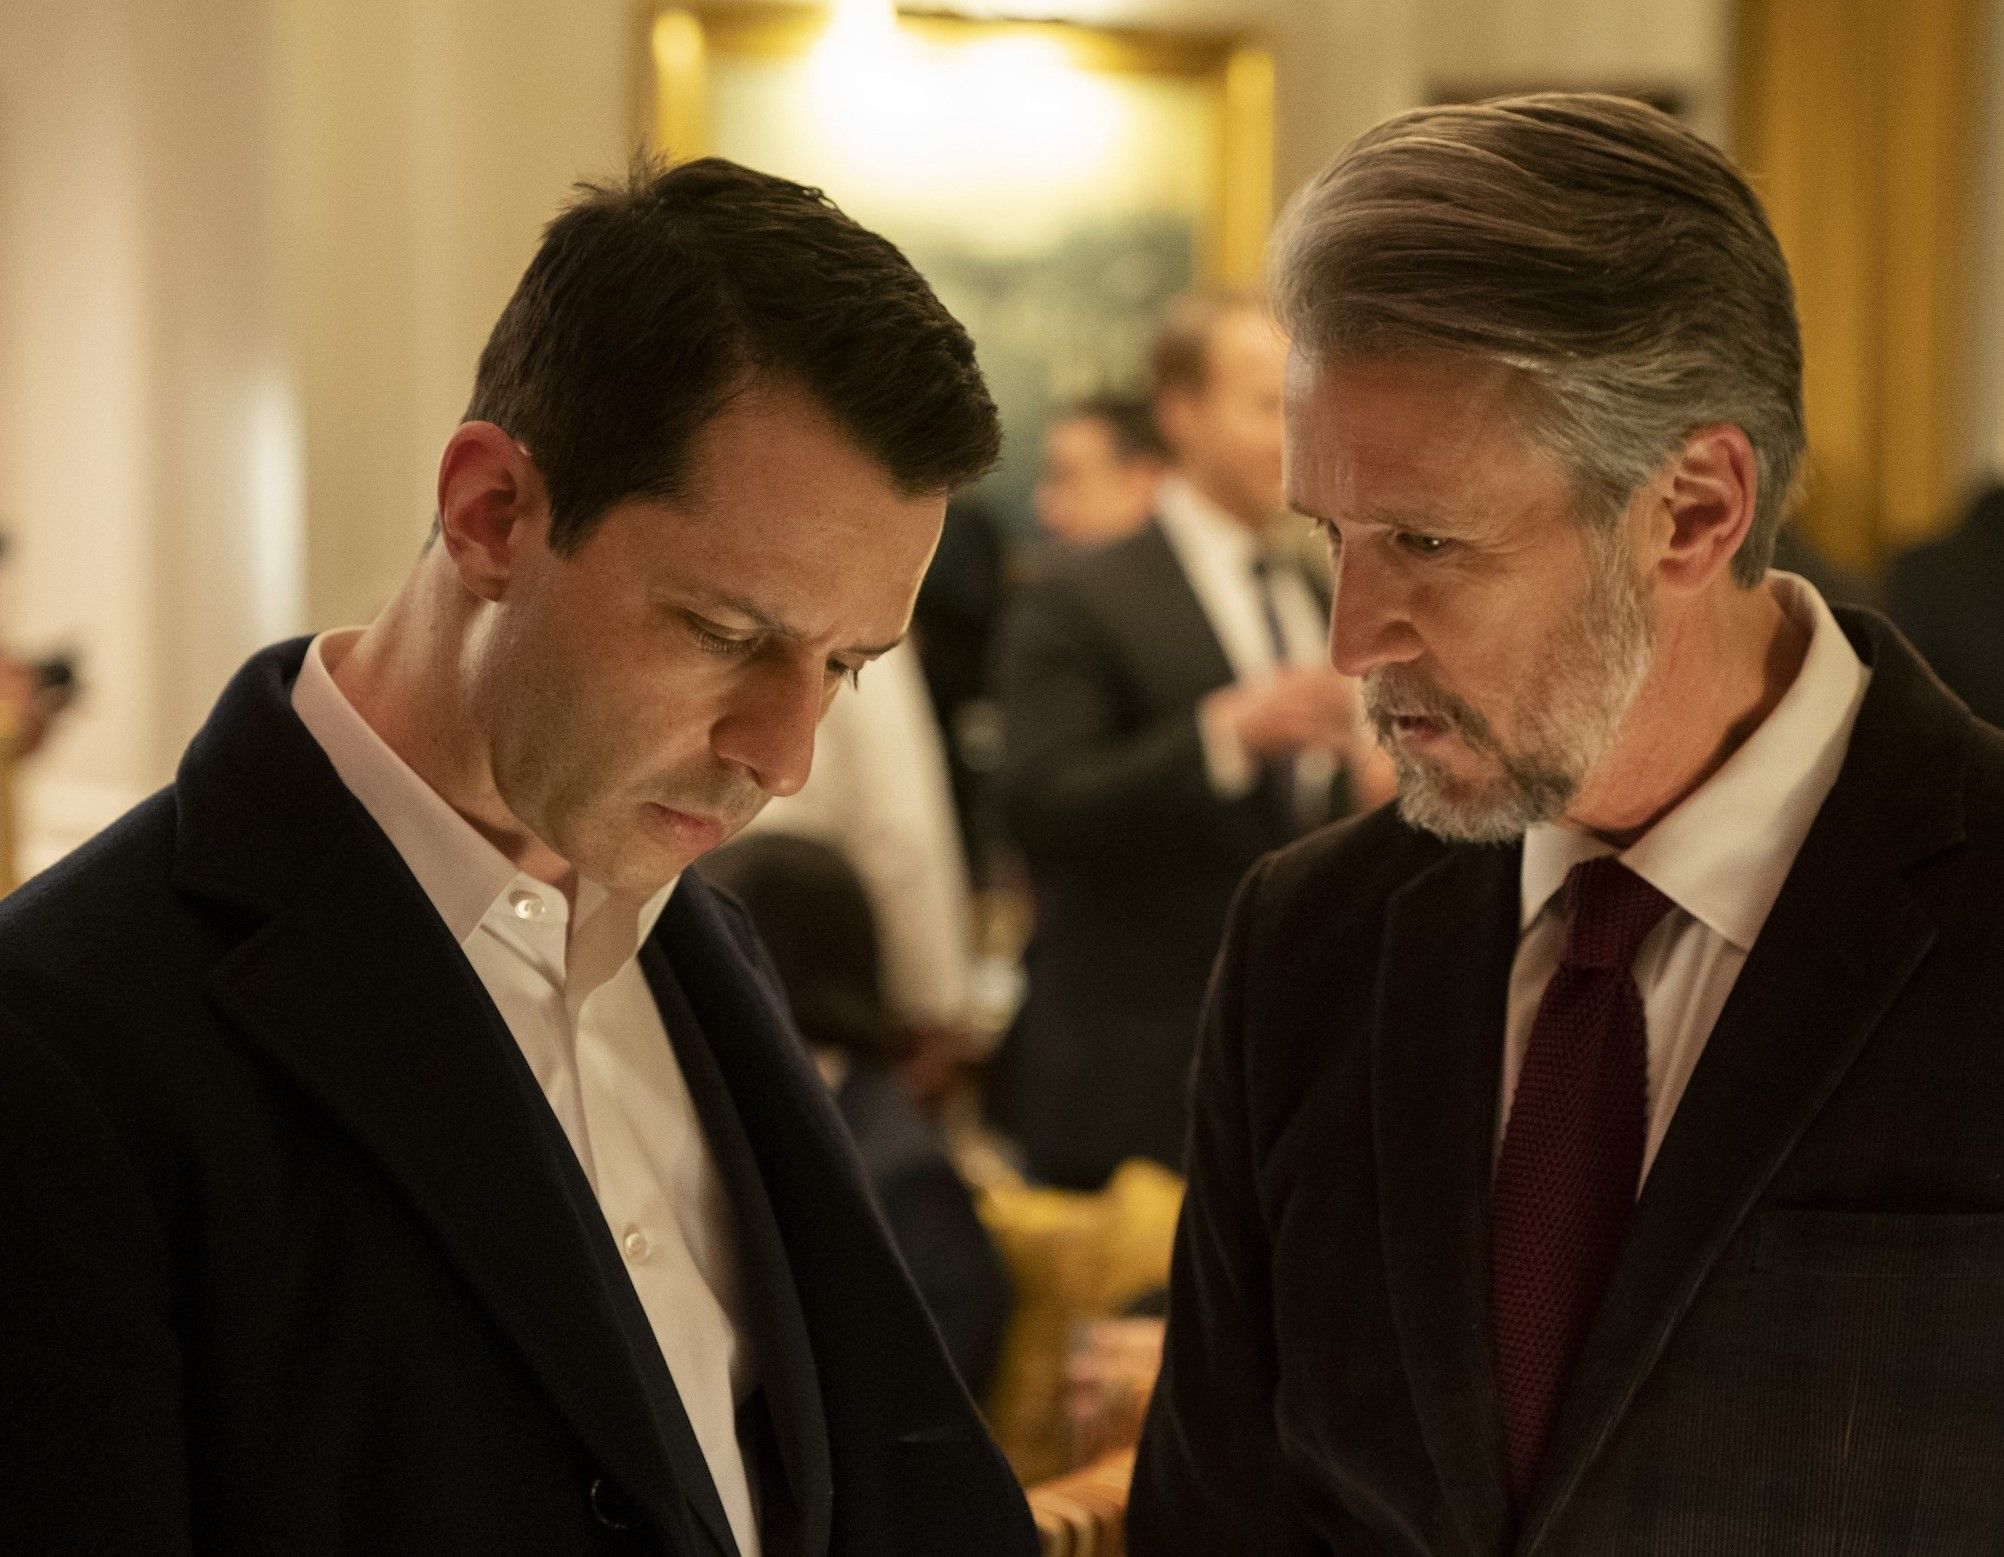 Where to Watch Succession